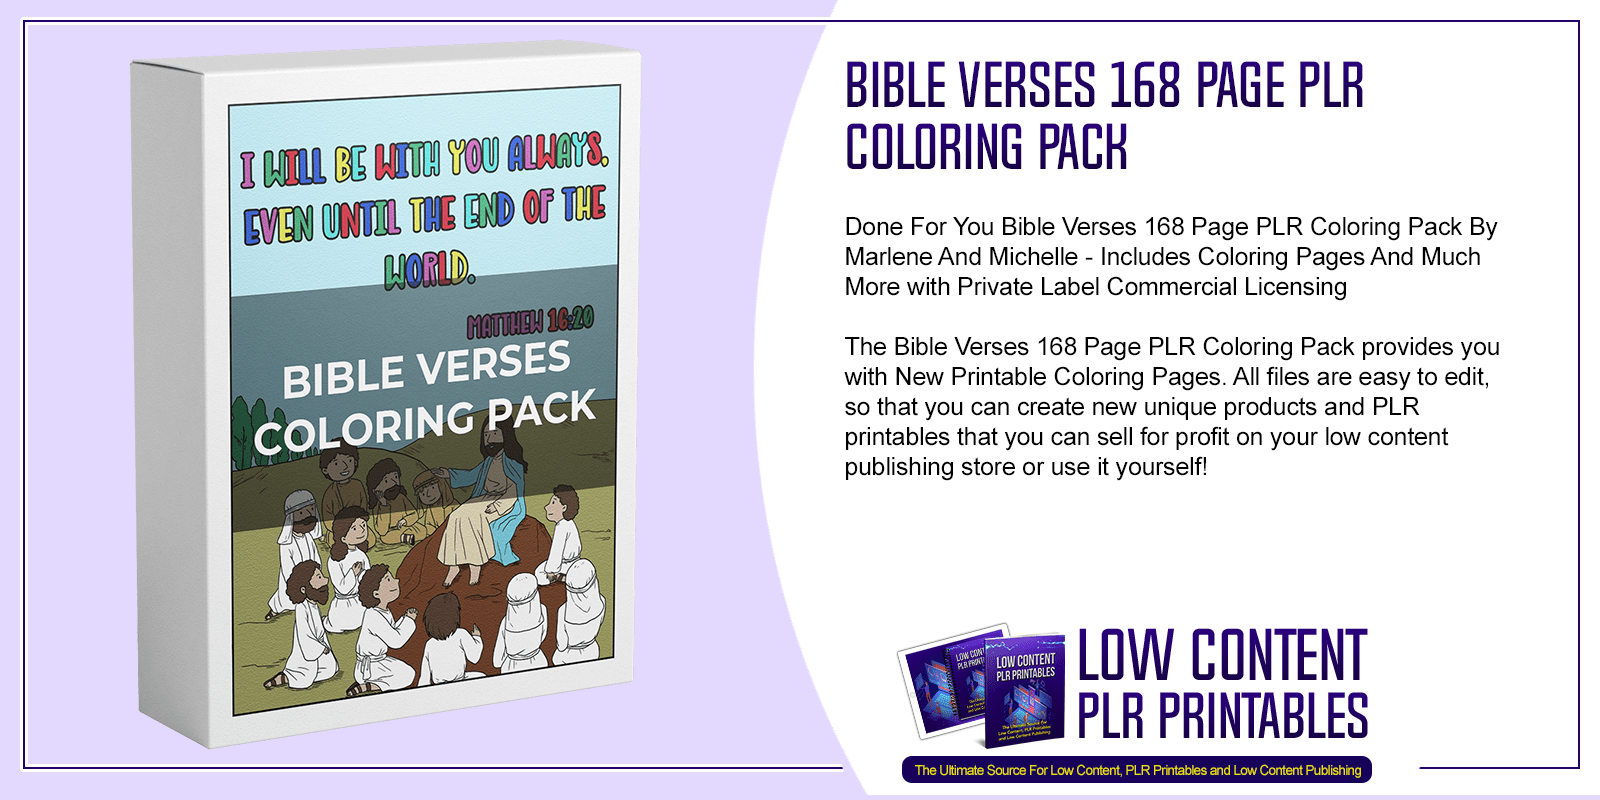 Bible Verses 168 Page PLR Coloring Pack